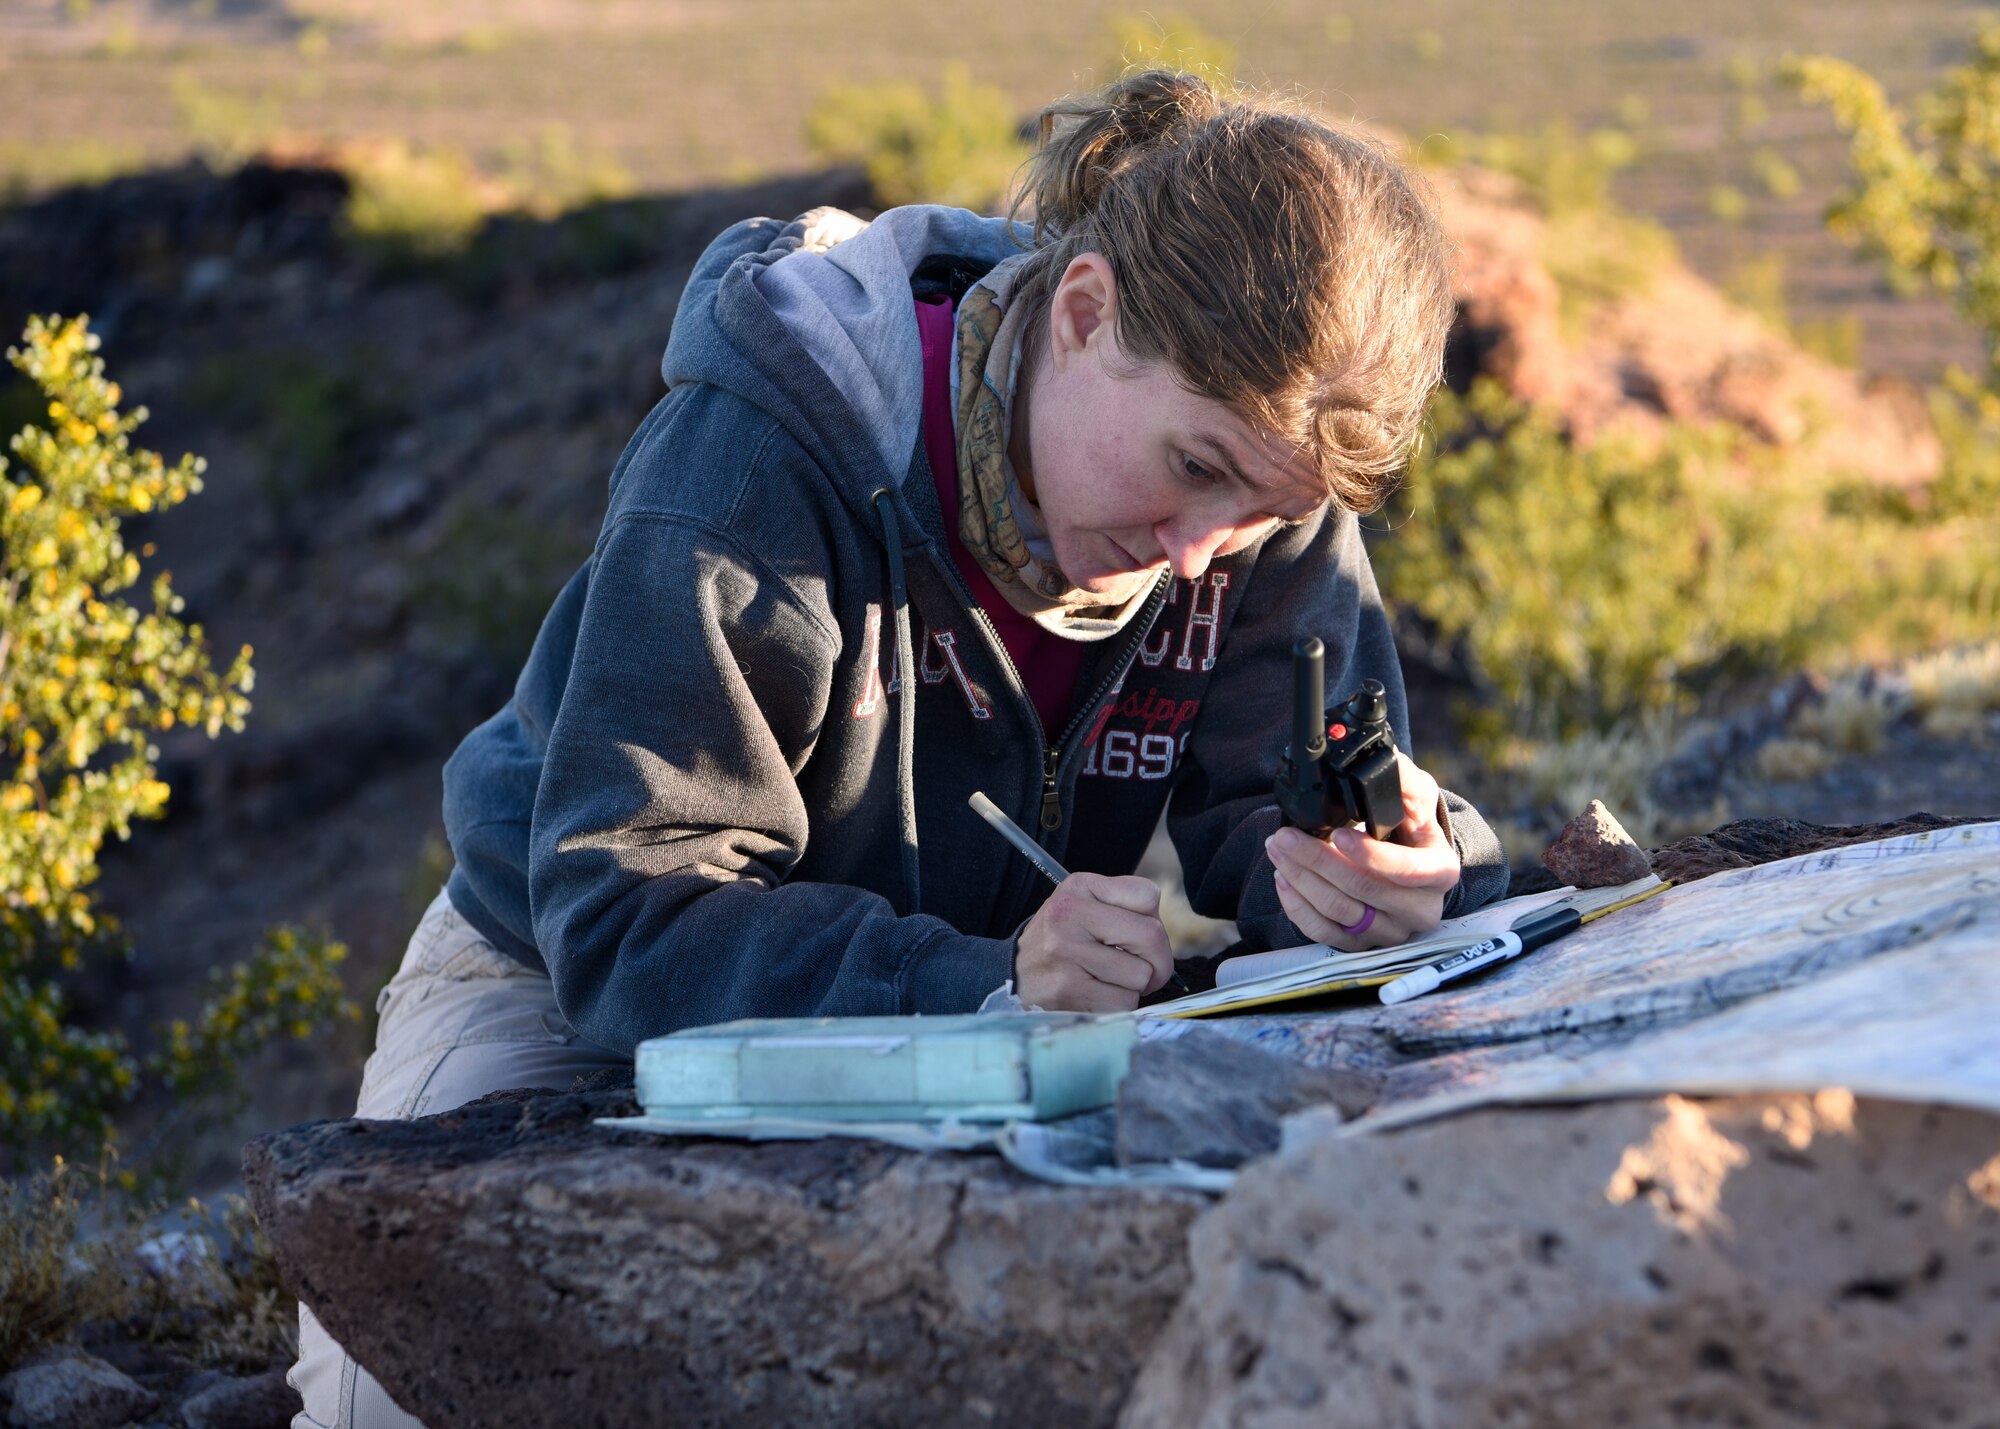 Courtney Kipp, Tunista Services Pronghorn biologist, plots coordinates on a map April 17, 2019, at the Barry M. Goldwater Range East in Wellton, Ariz.